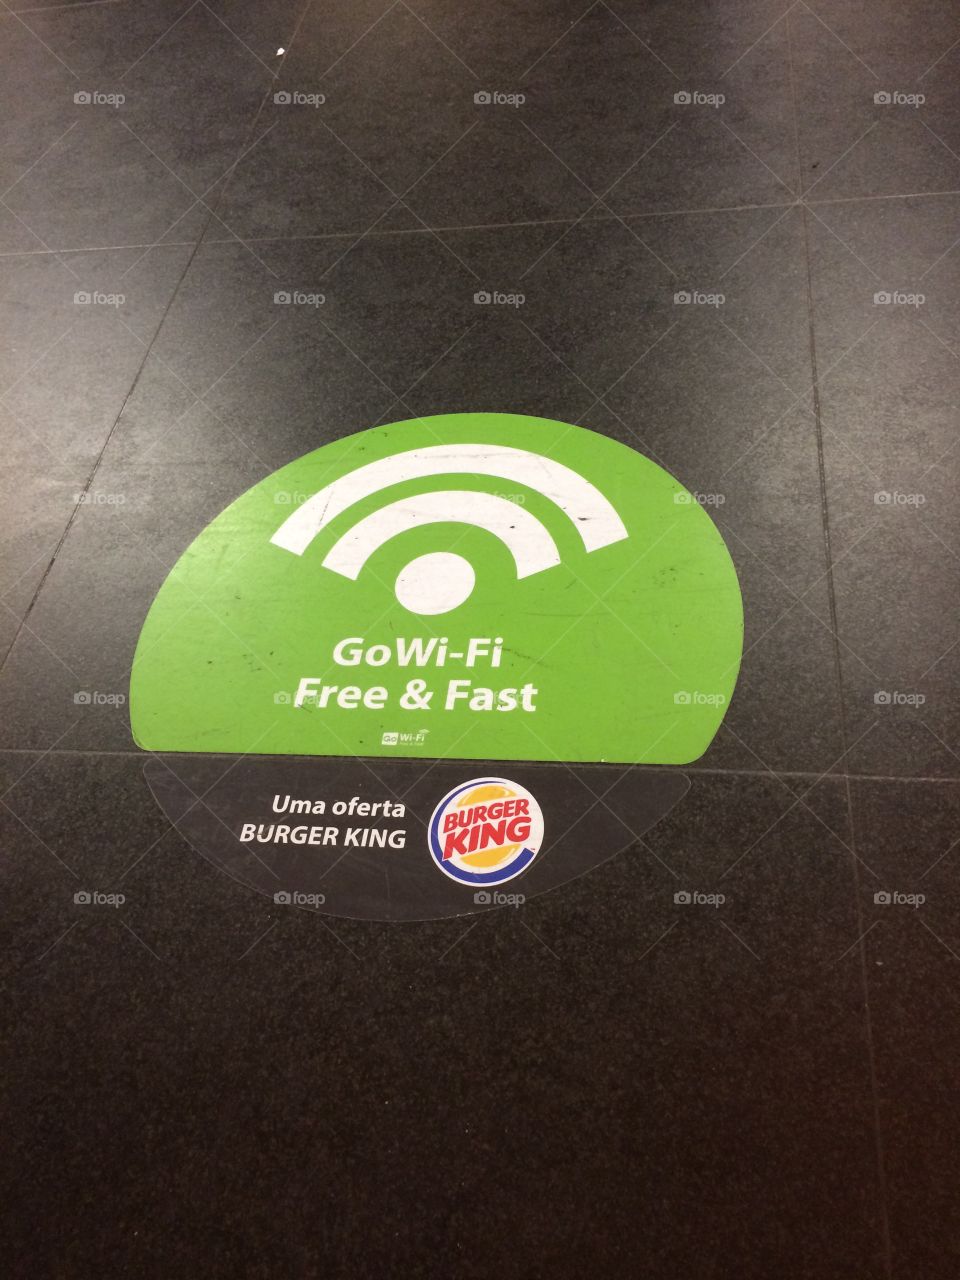 Wi fi free publicity at metro station 